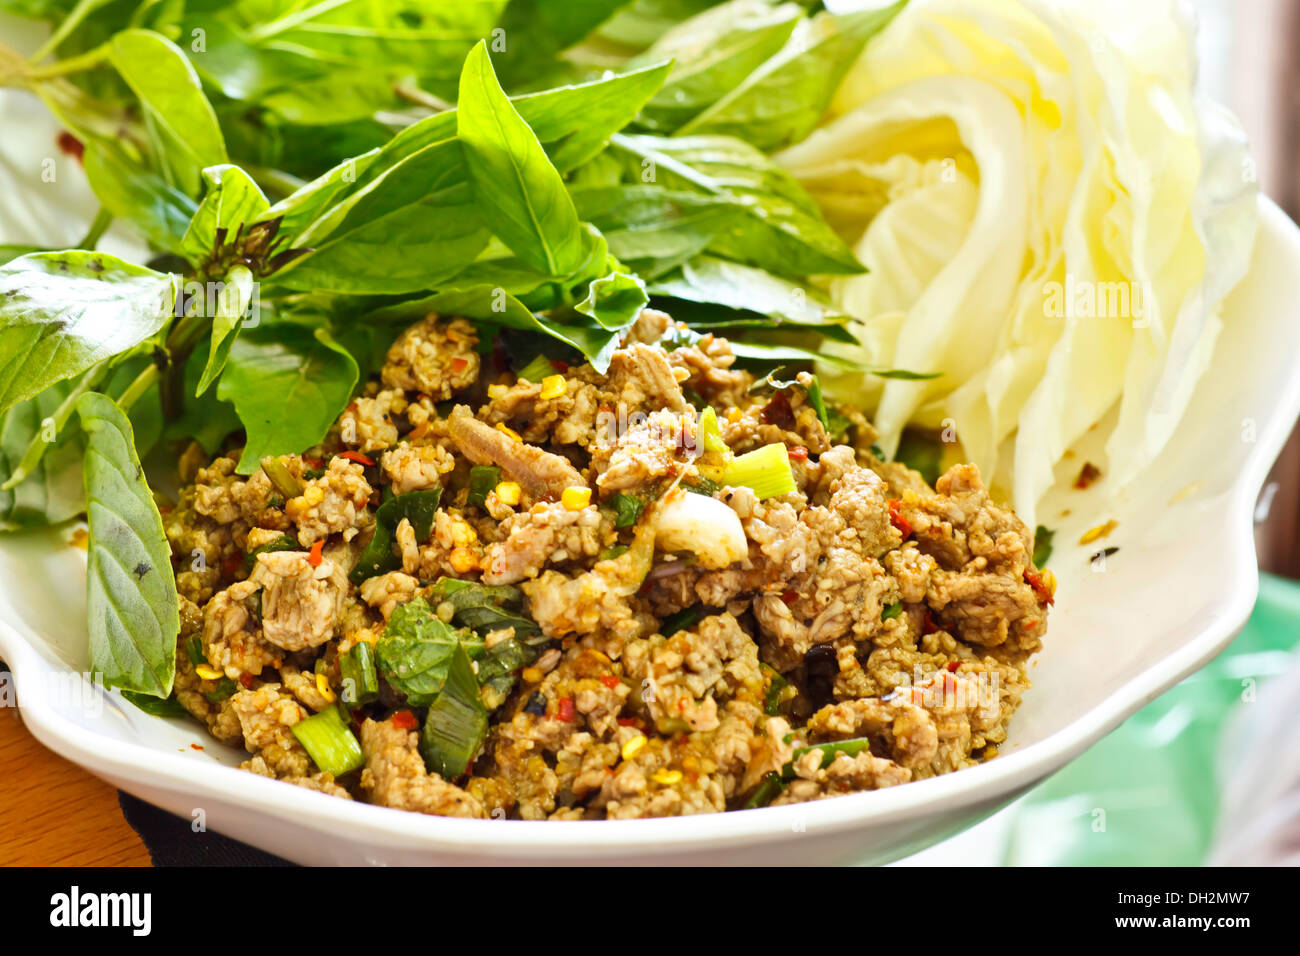 Spicy minced meat salad Stock Photo